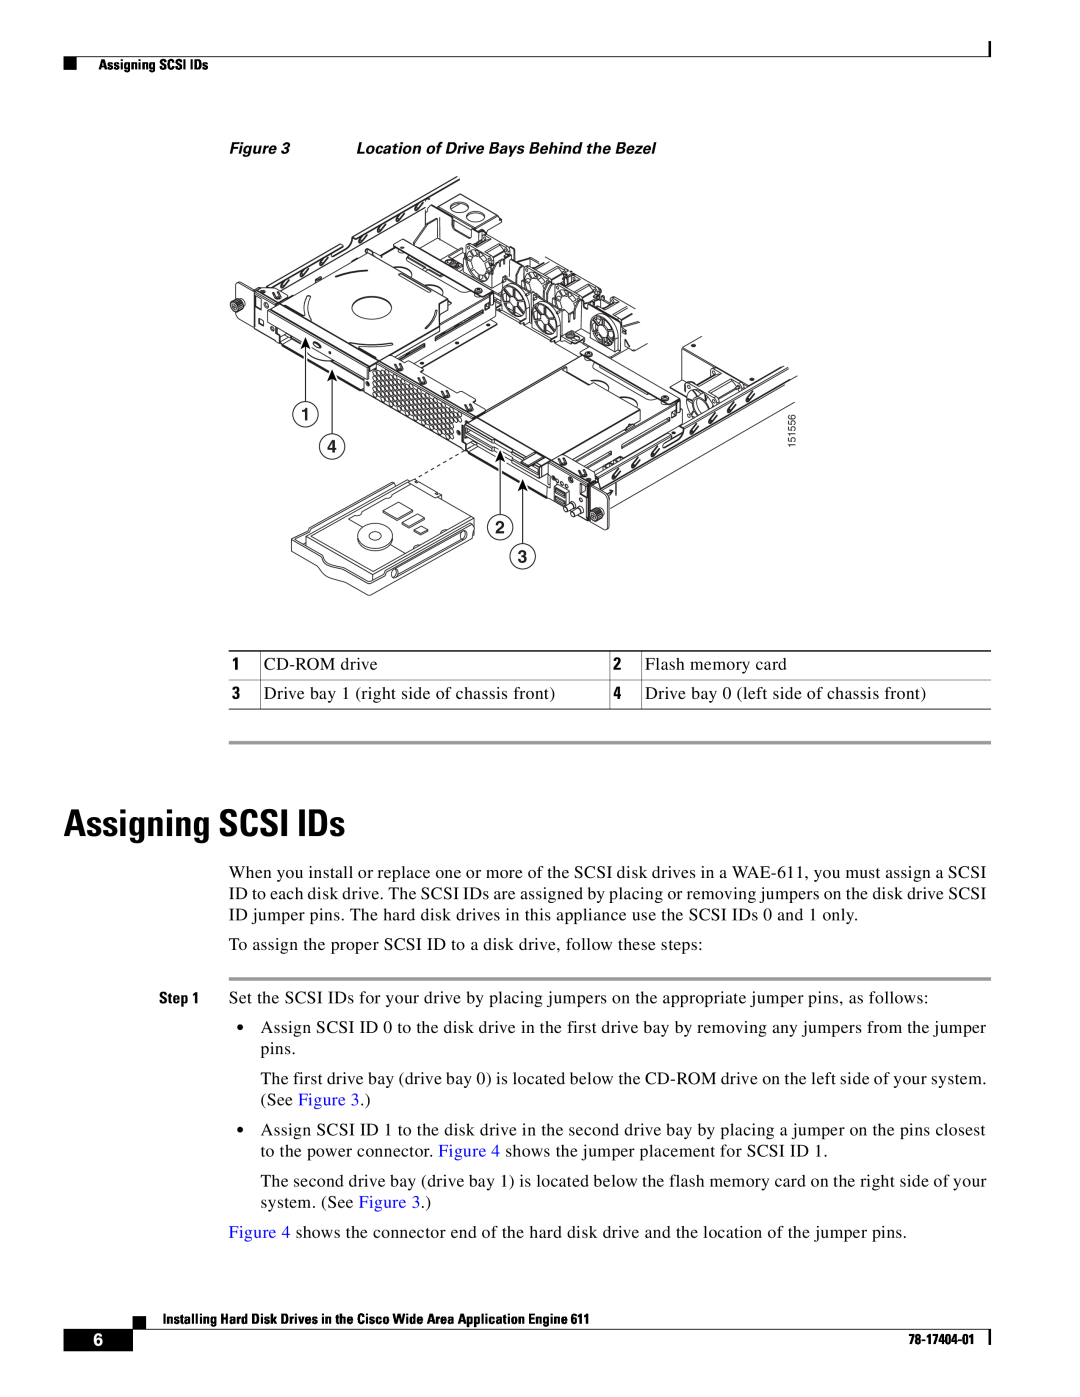 Cisco Systems Engine 611 manual Assigning SCSI IDs 